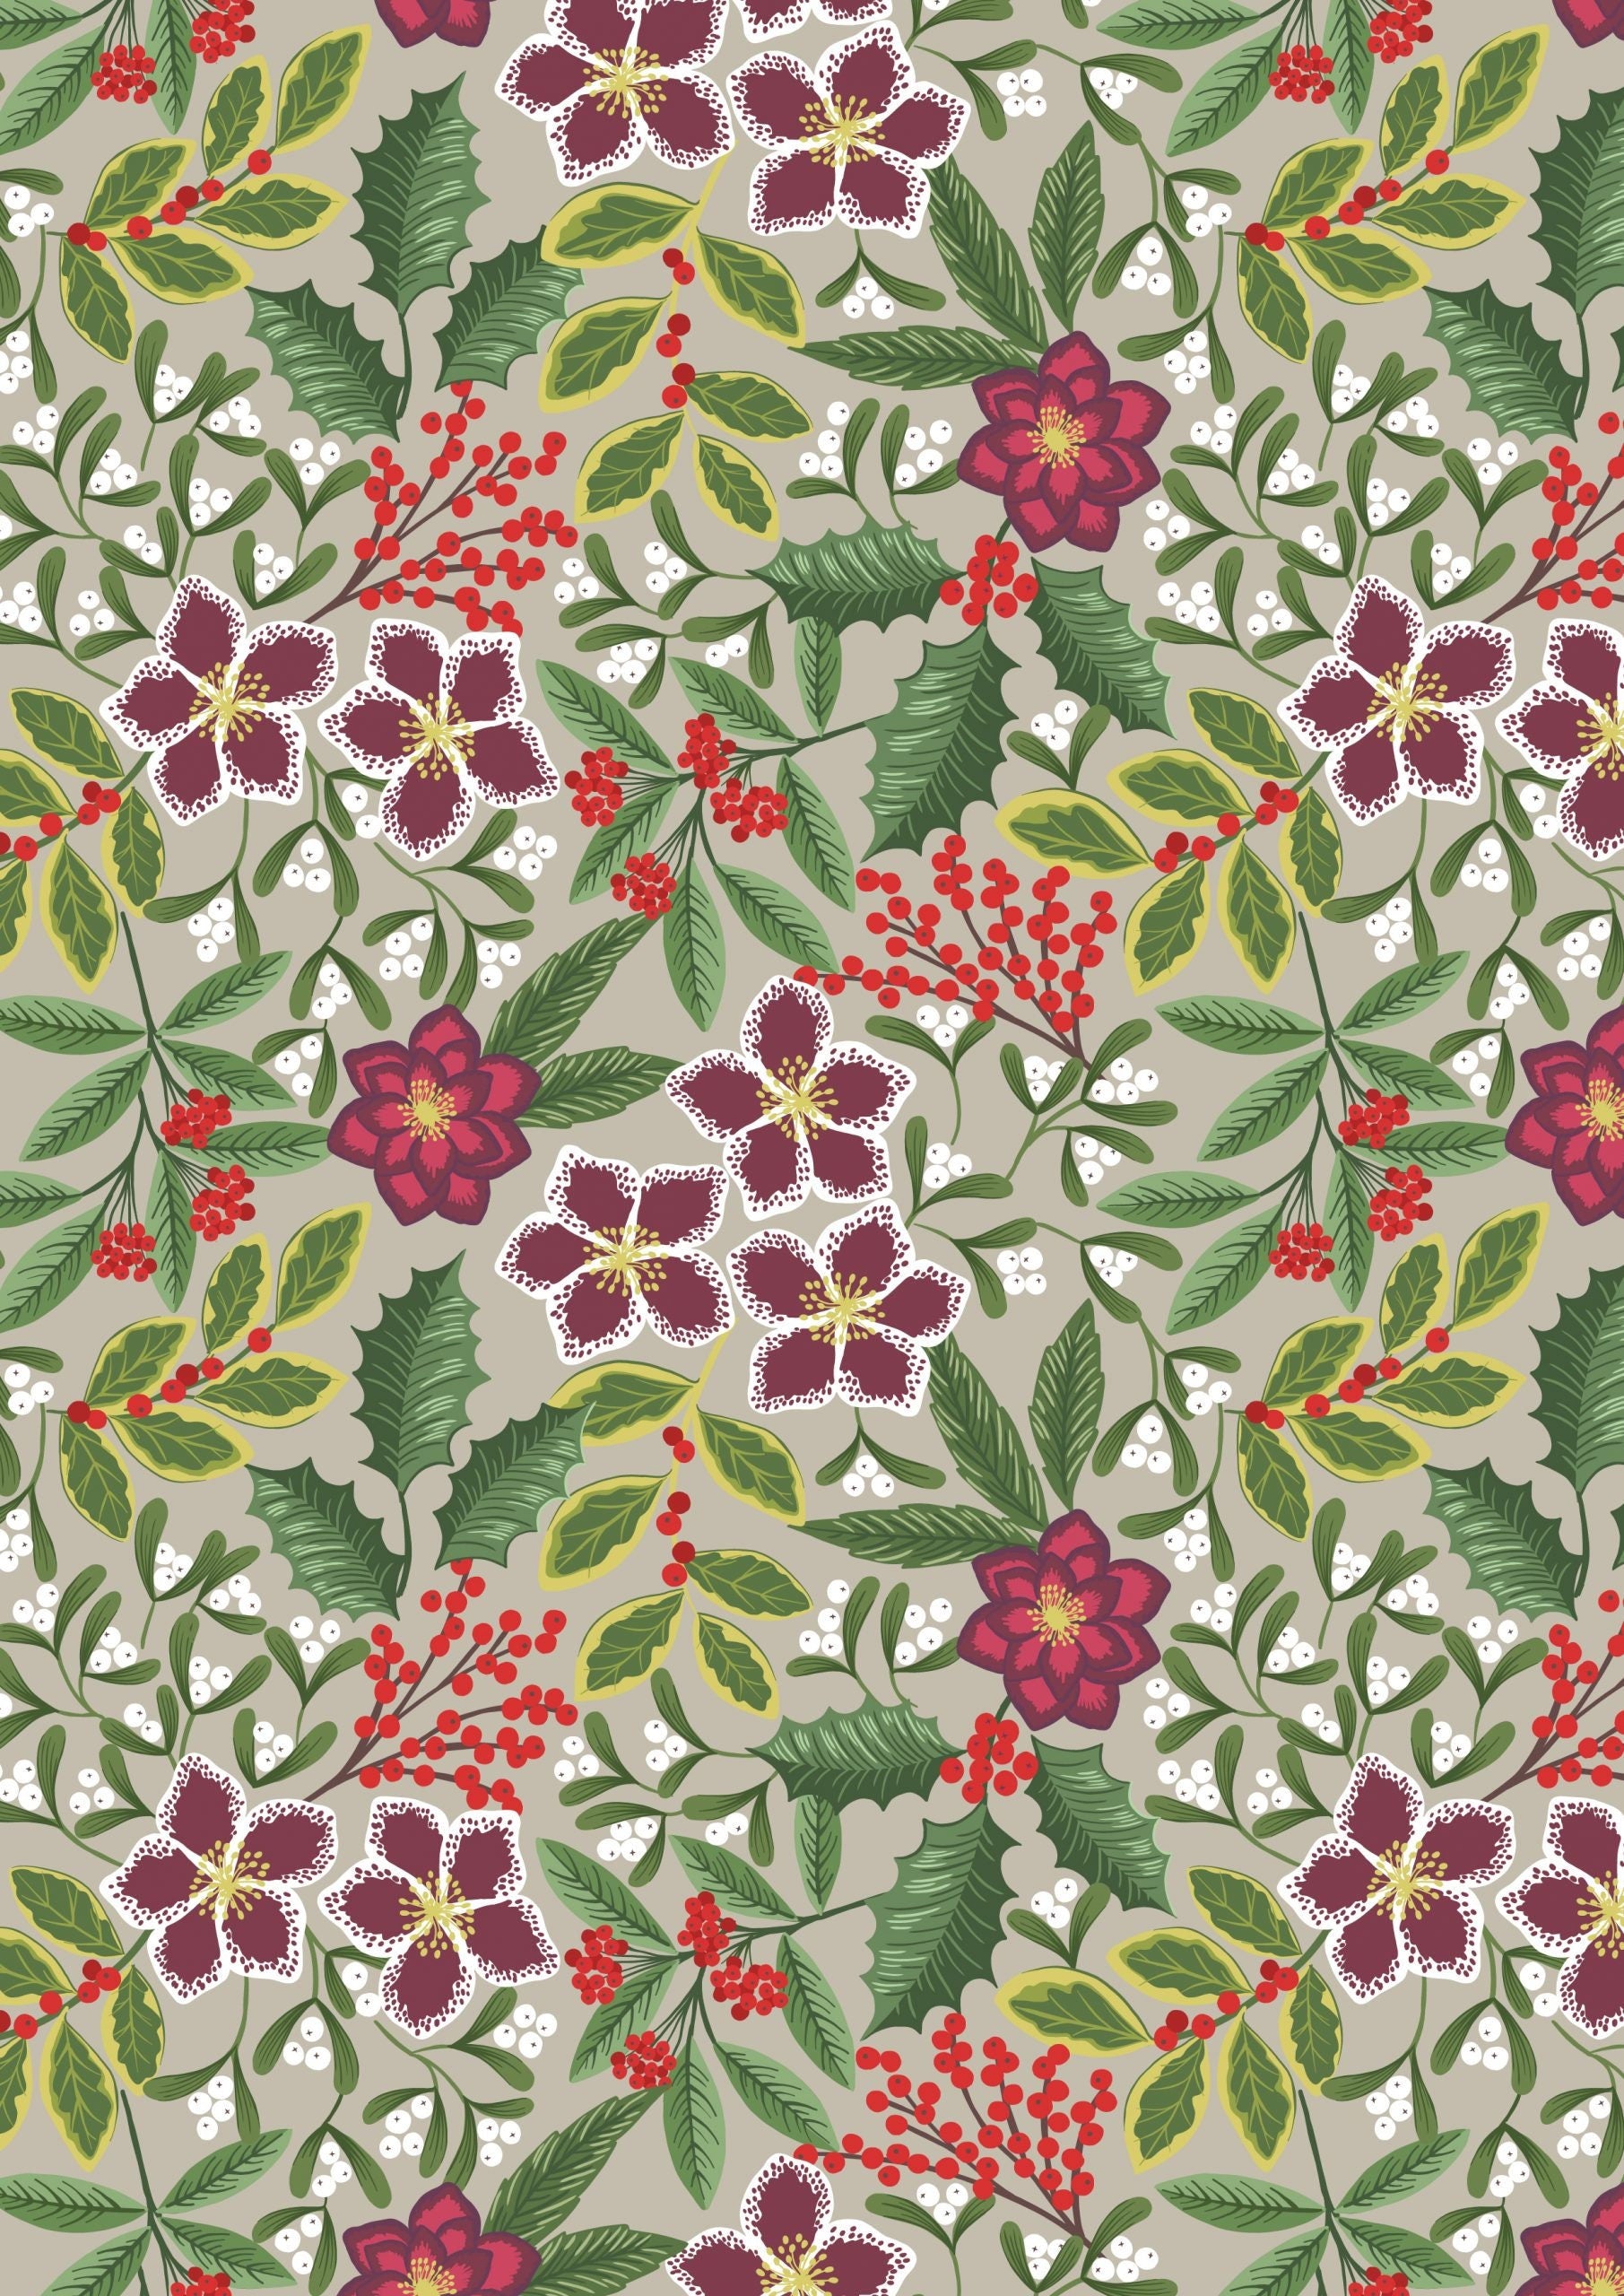 Red poinsettias, red and white berries, green leaves and holly on beige 100% cotton fabric.